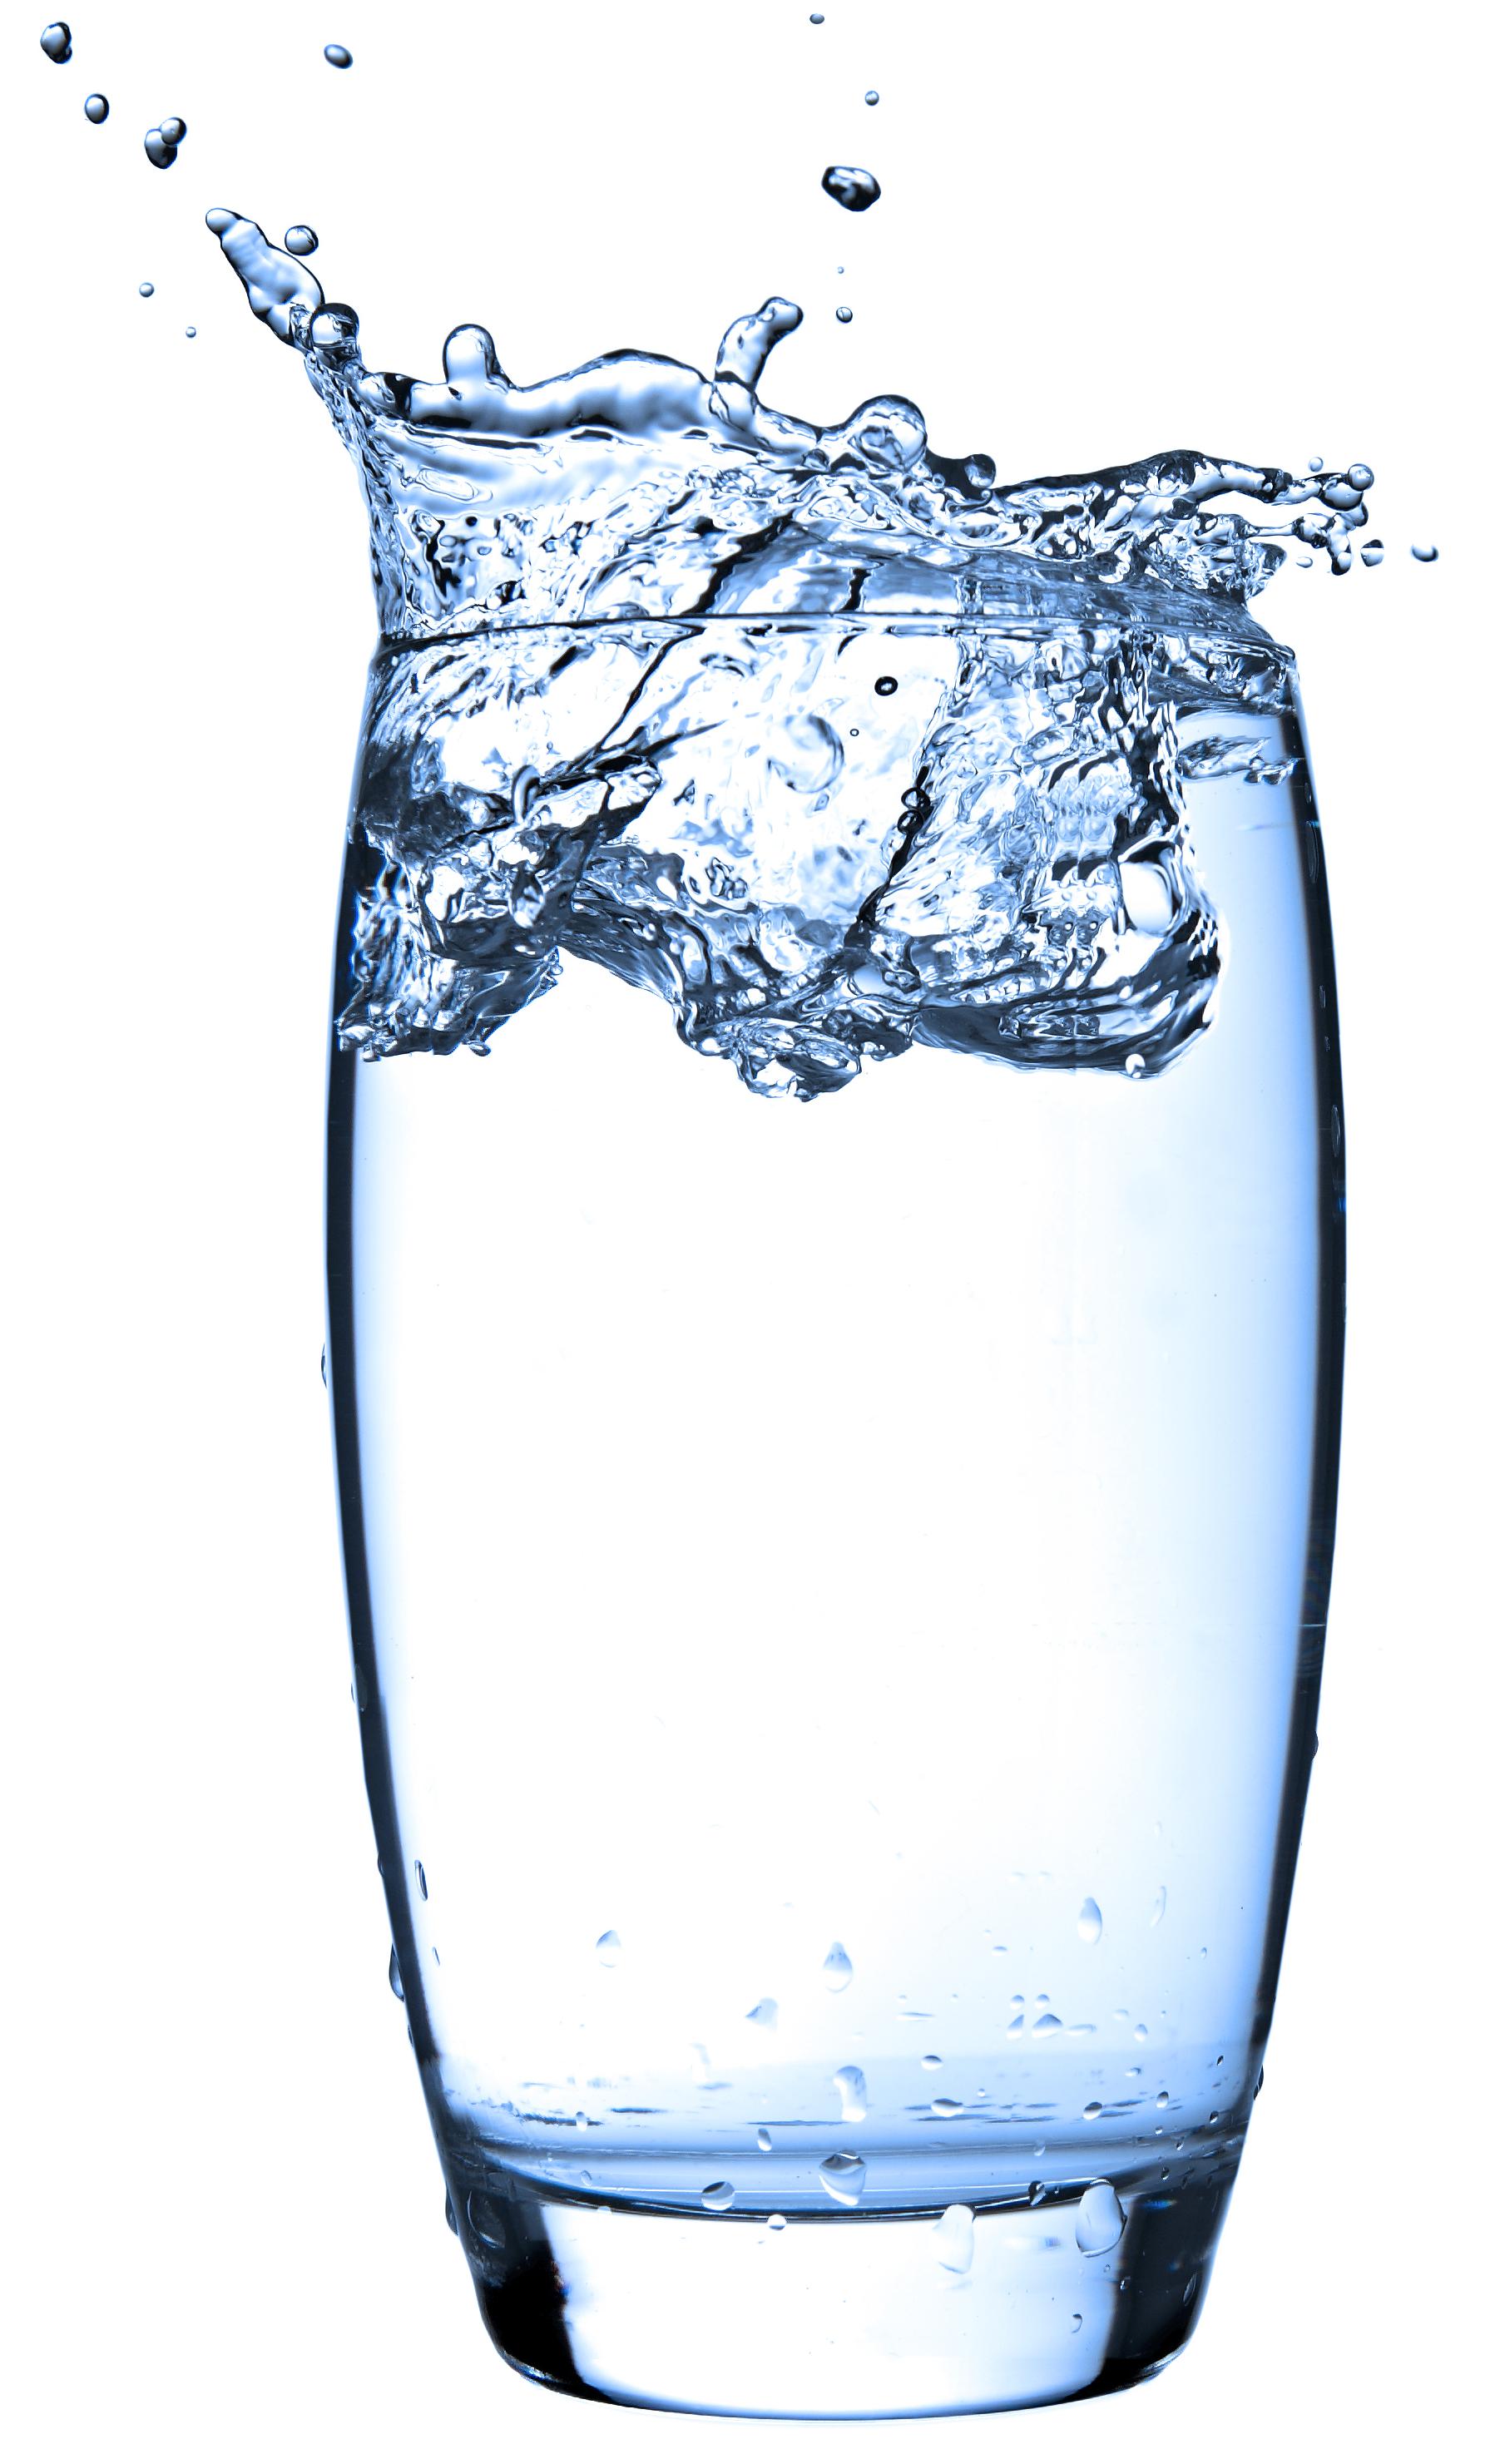 Why Drinking Water Is Important For Health